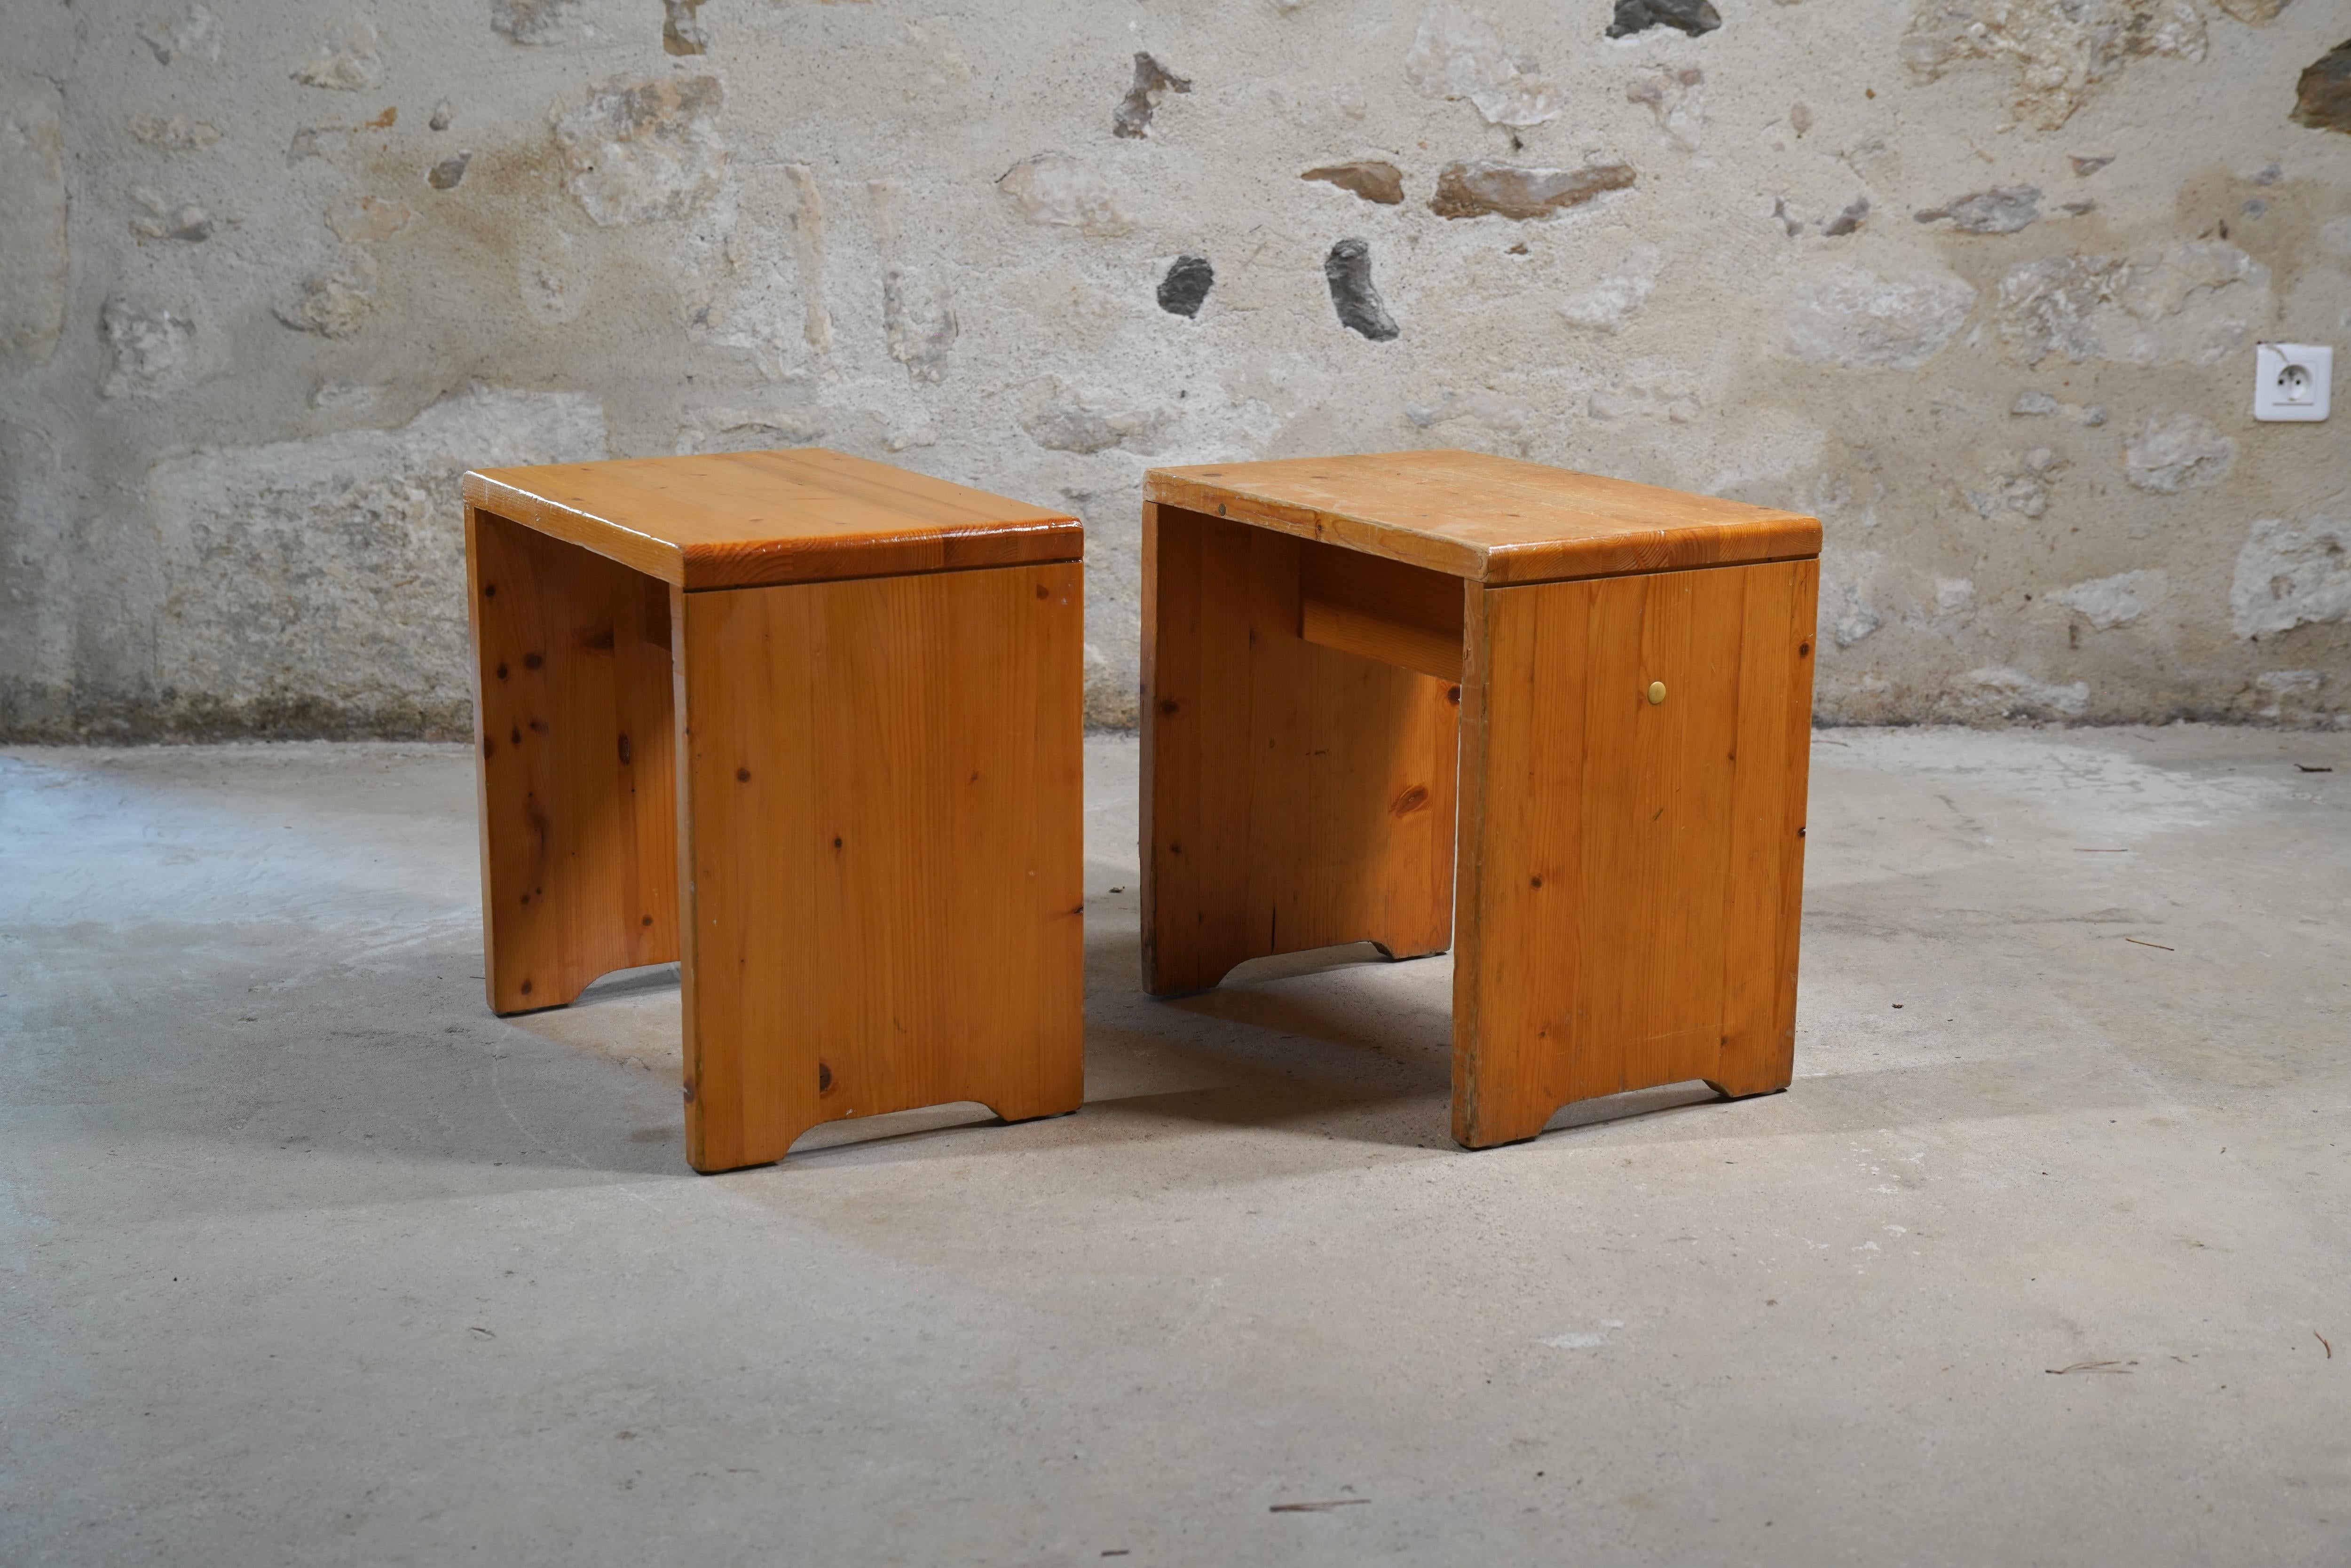 Charlotte Perriand Stools from Les Arcs, France circa 1968 (4 Available) For Sale 8